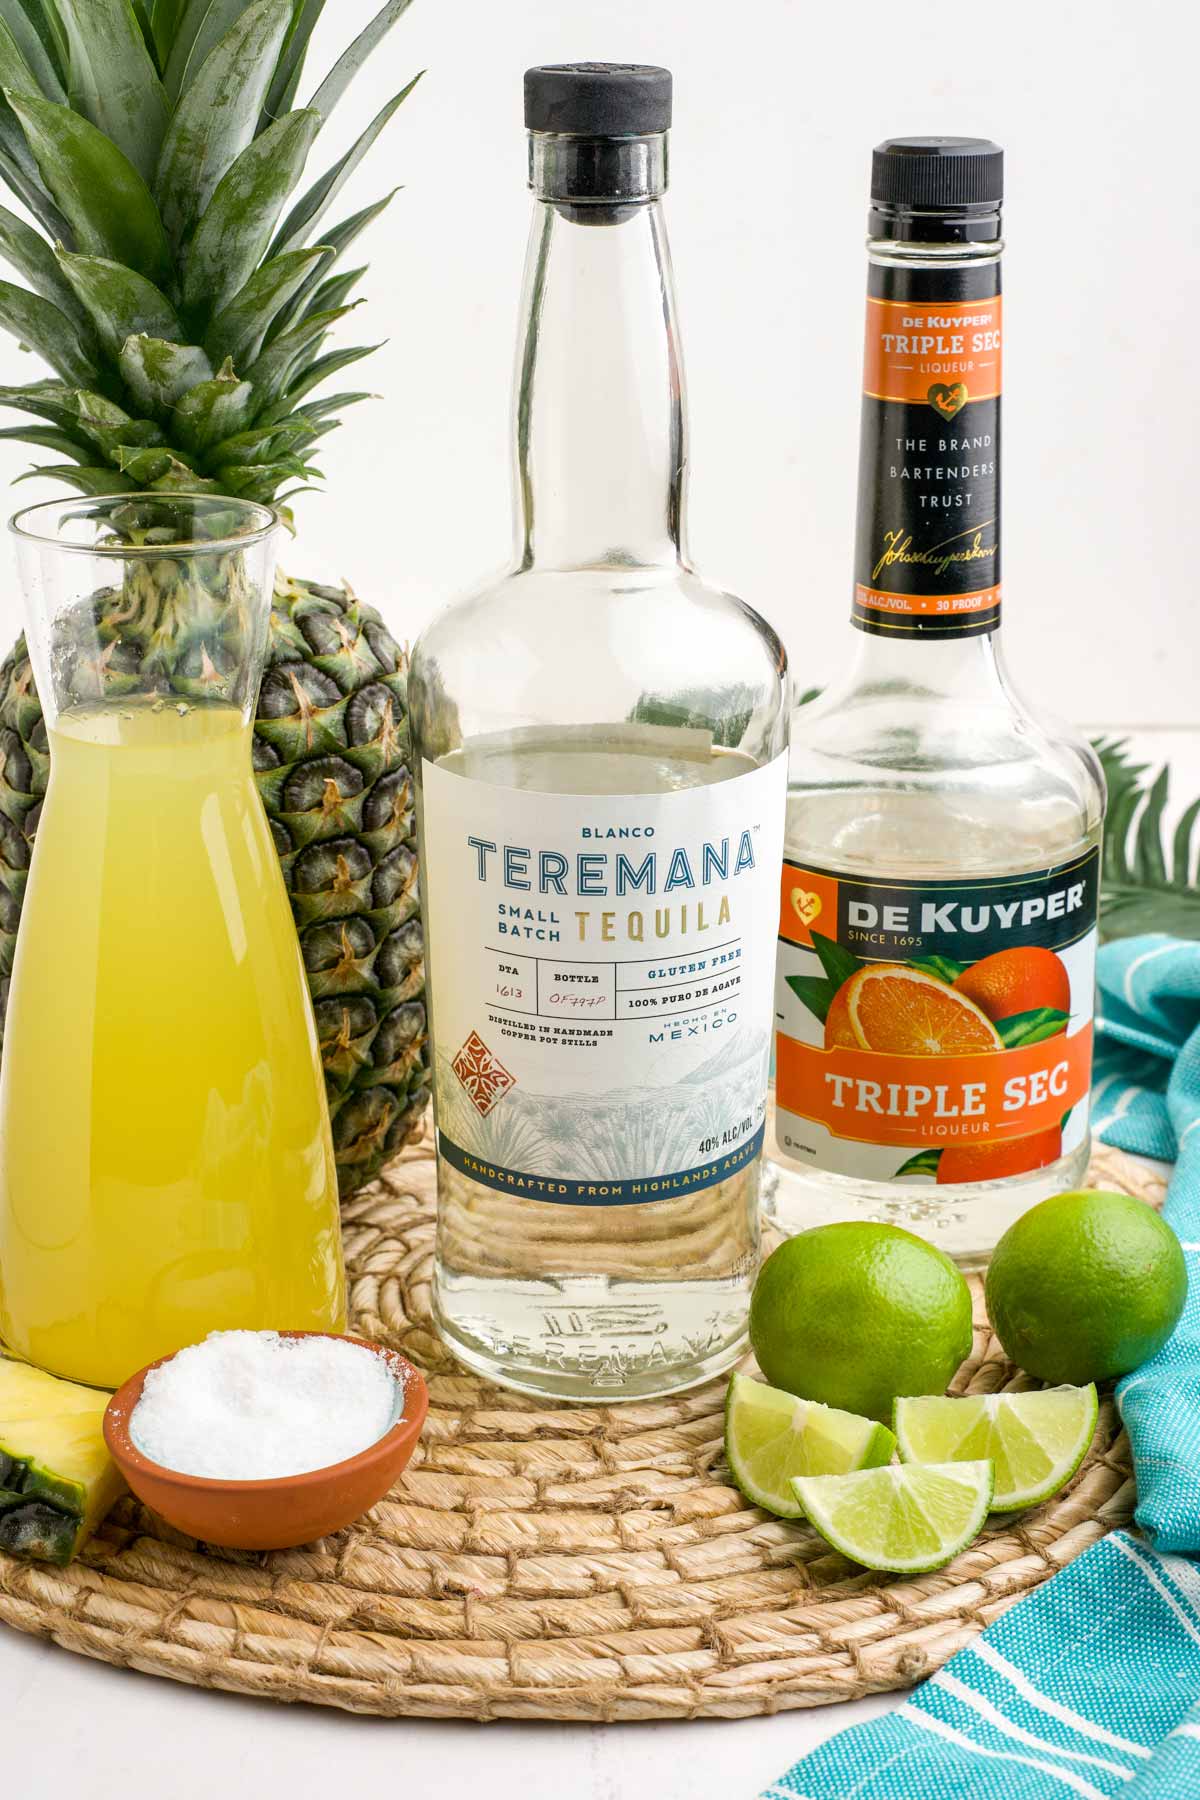 Ingredients to make a pineapple margarita on the table.